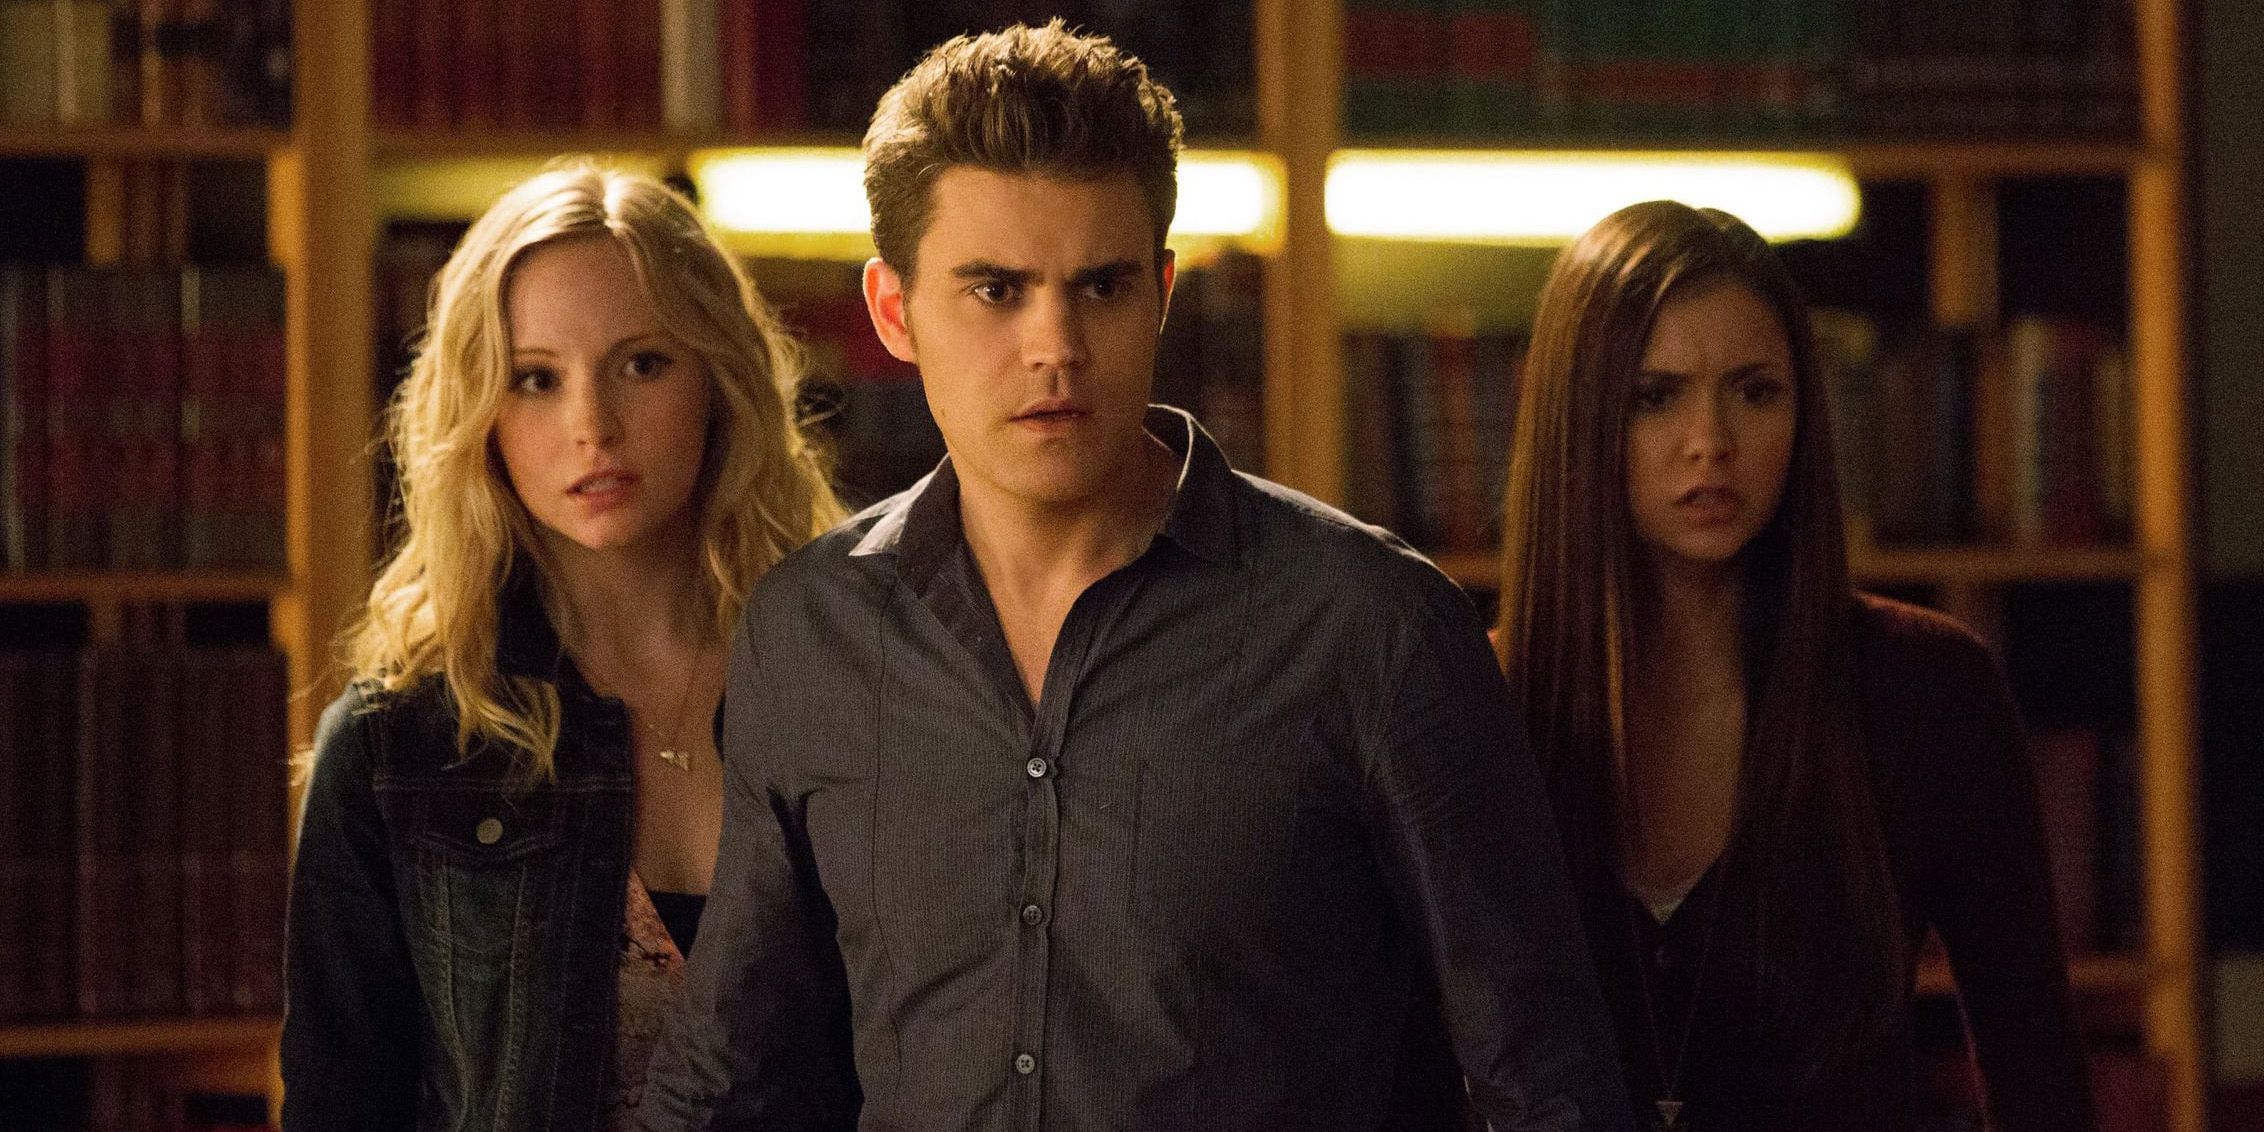 Stefan standing in front of Caroline and Elena in The Vampire Diaries.